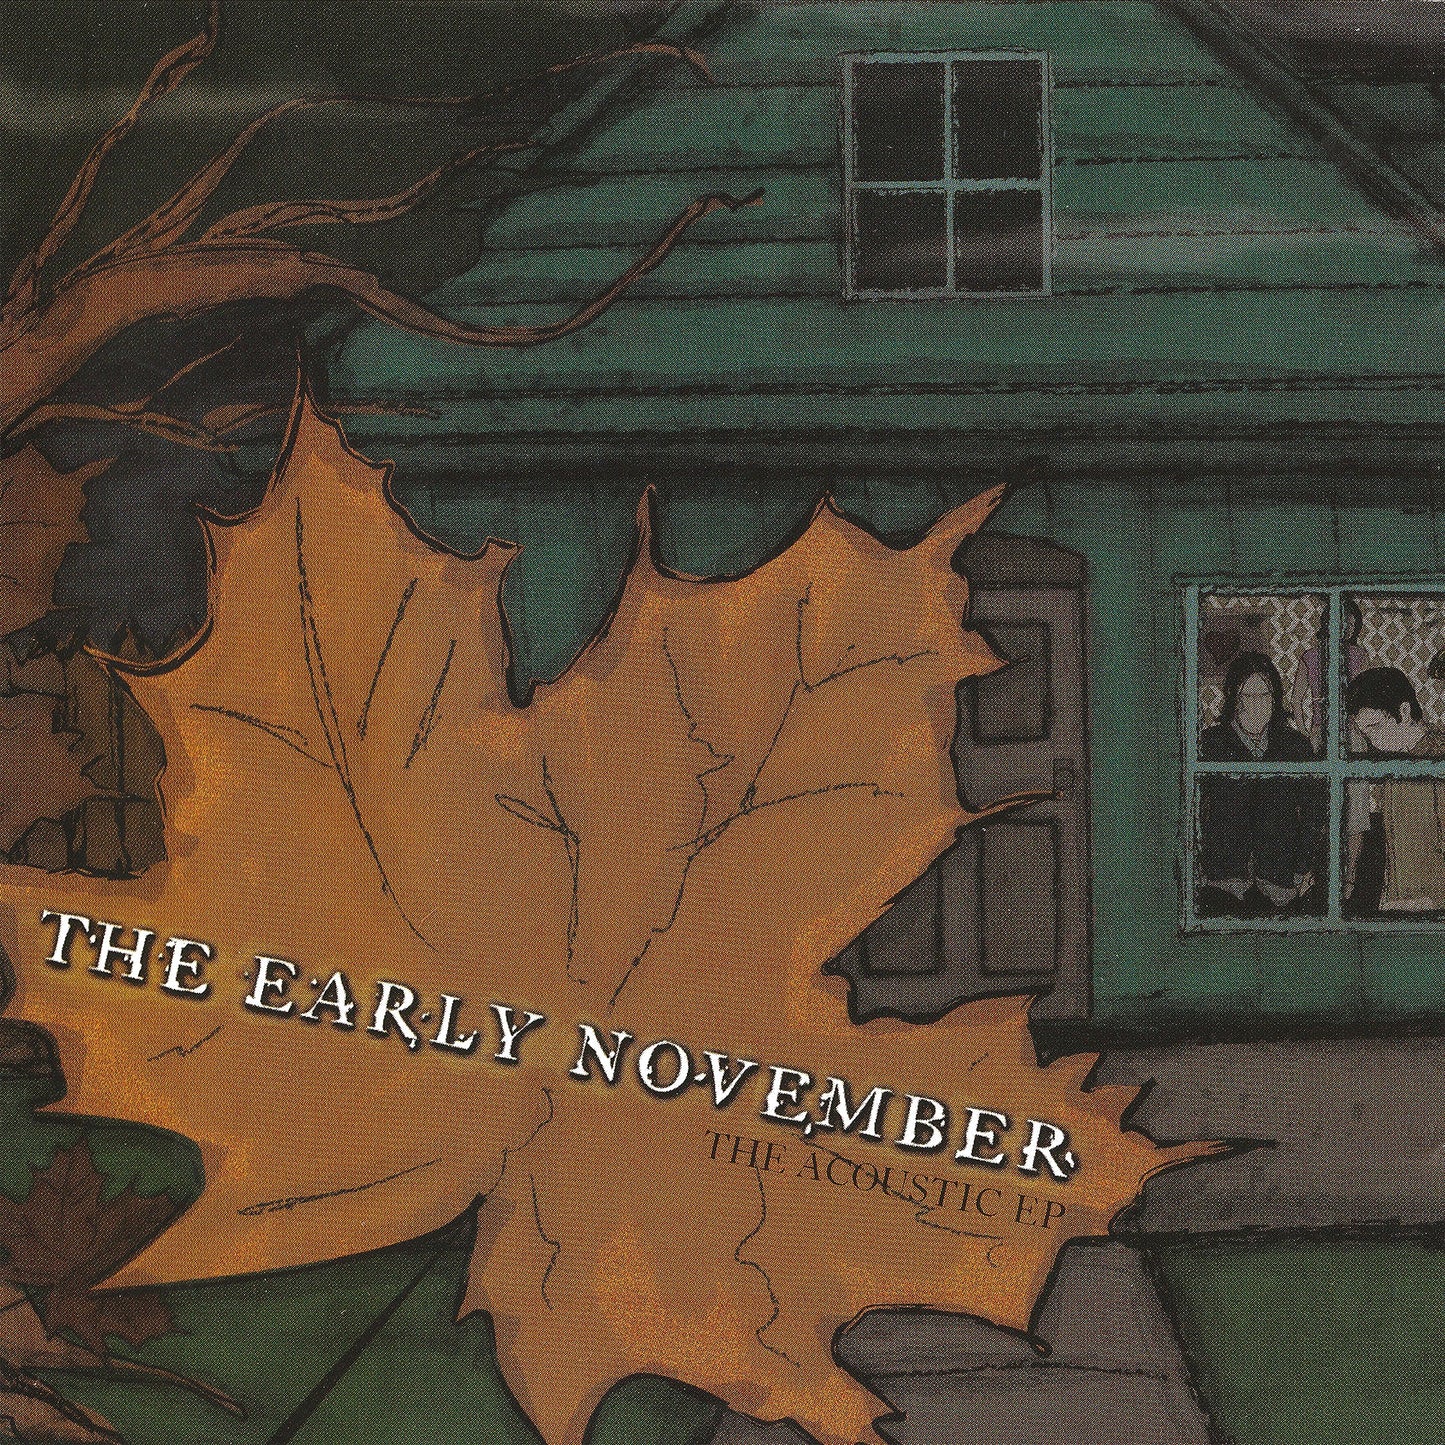 The Early November “The Acoustic EP" EP